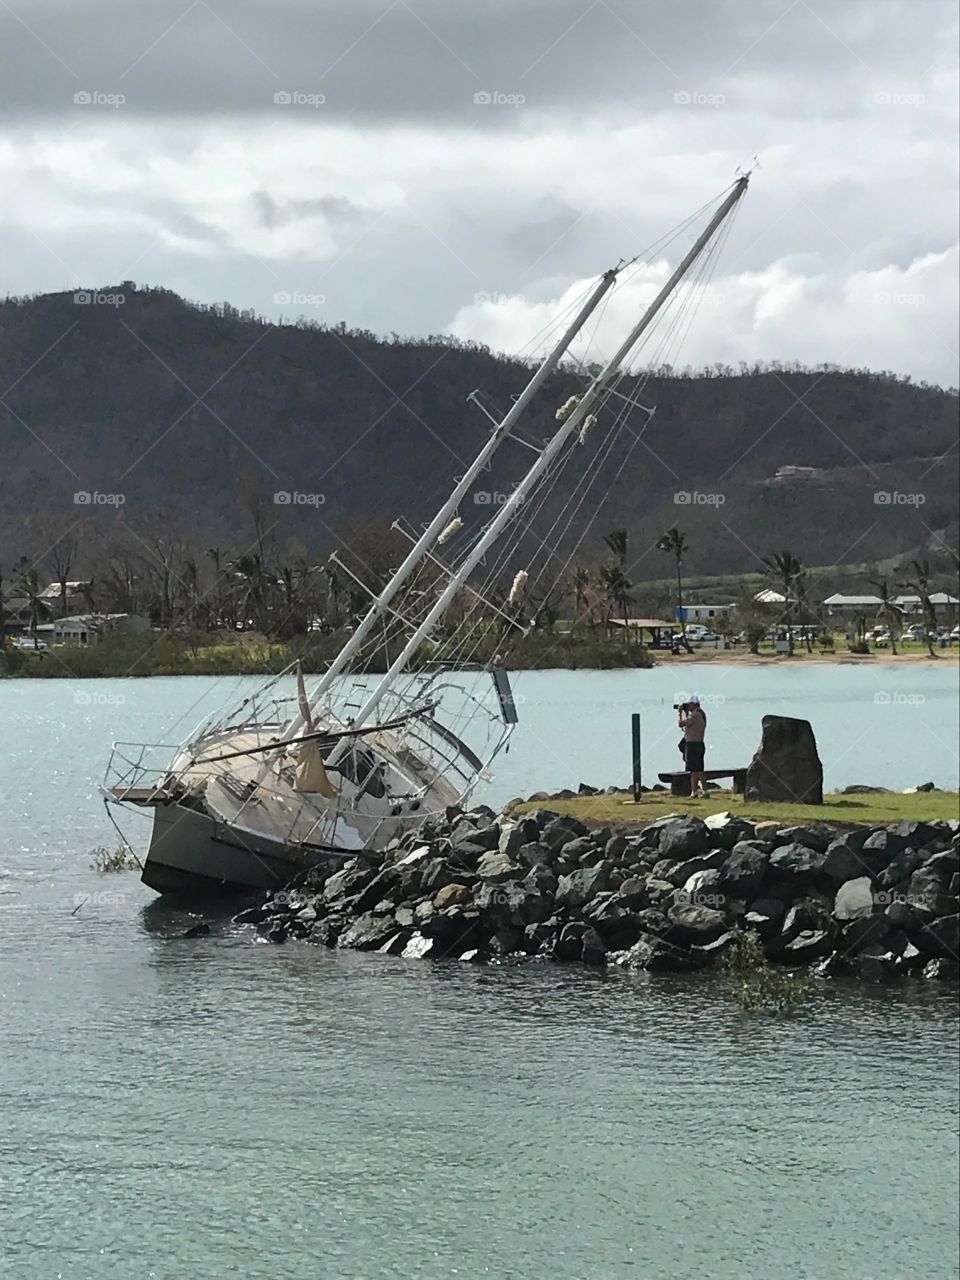 Capsized sailboat in aftermath of Cyclone Debbie in Queensland south Australia 2017